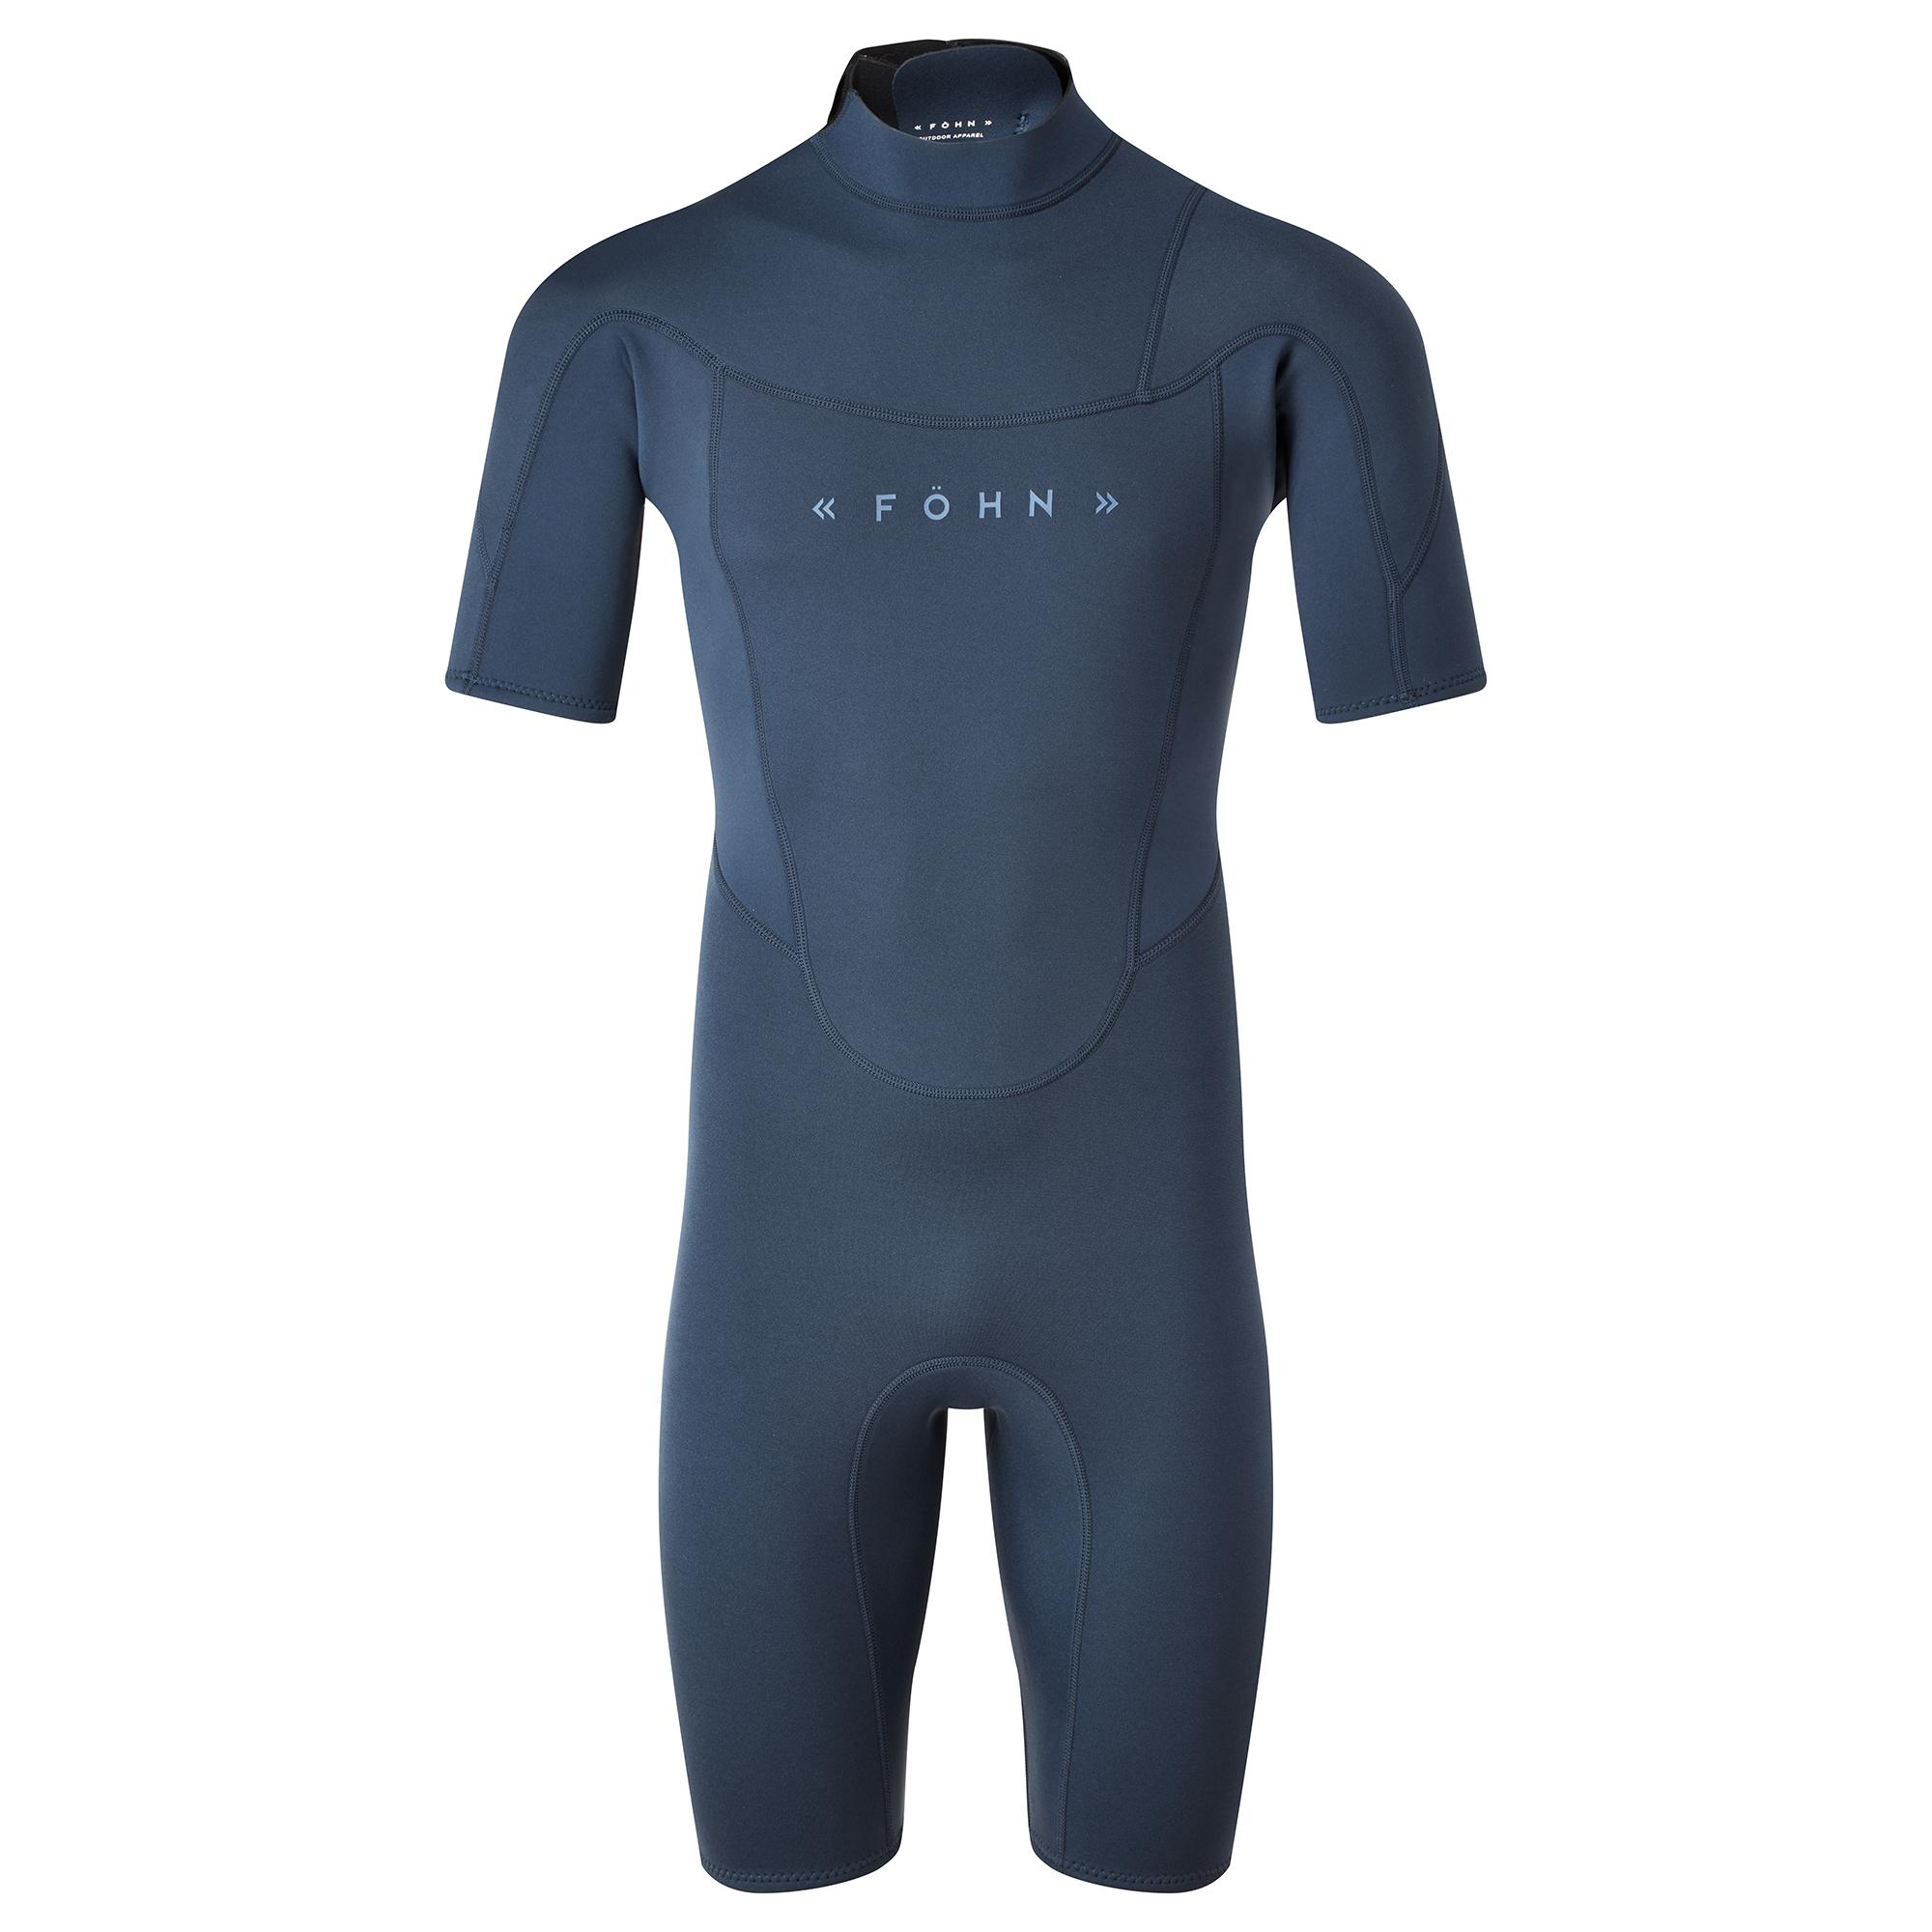 Fhn 2mm Shorty Wetsuit - Navy